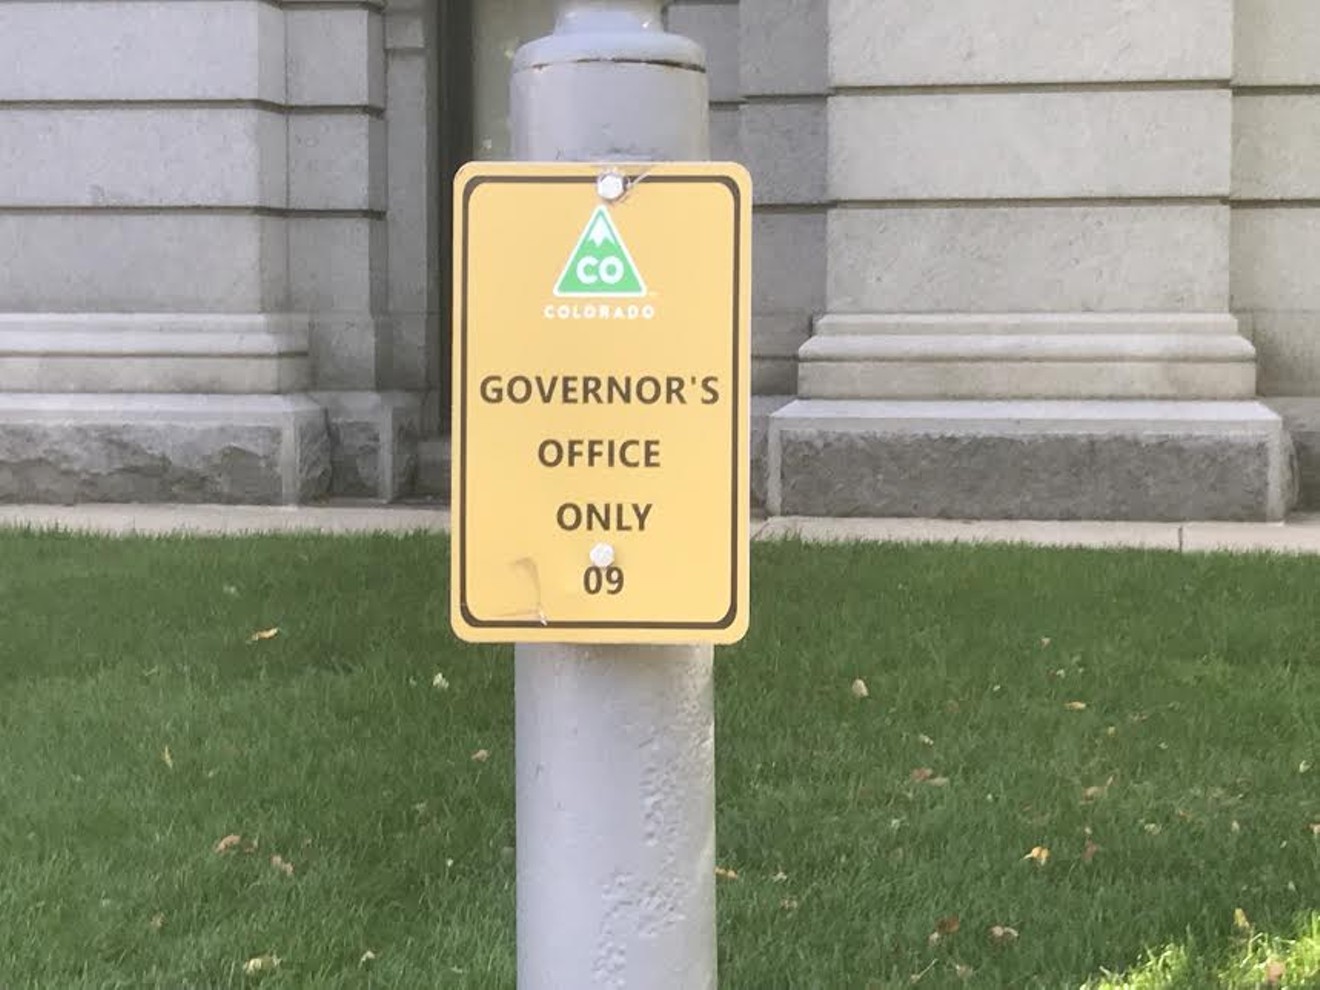 Walker Stapleton's (mostly unused) parking spot at the Colorado State House.